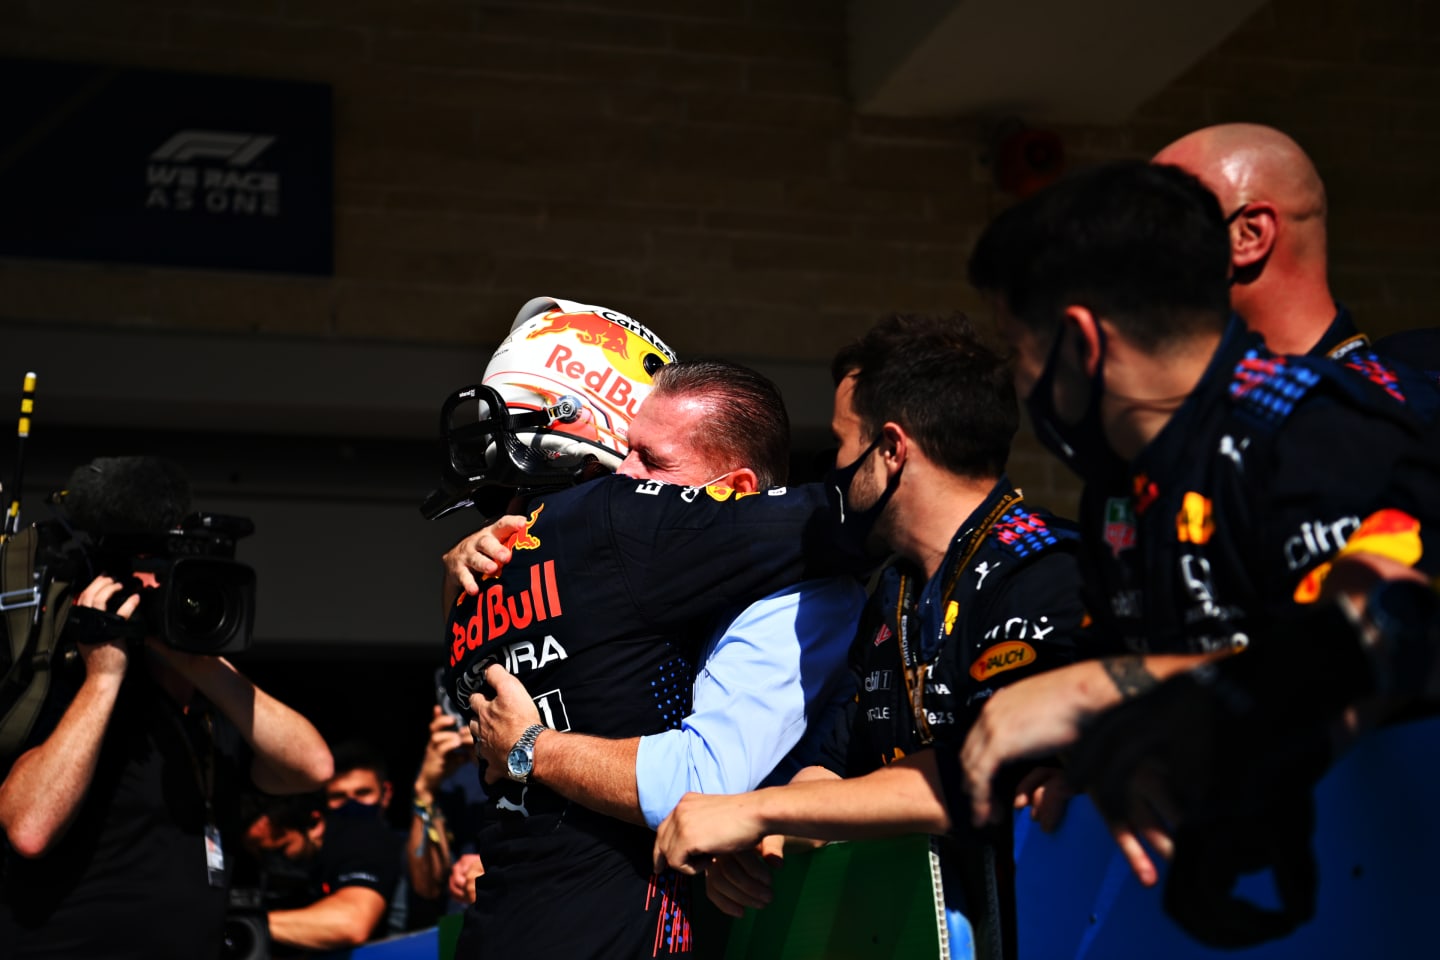 AUSTIN, TEXAS - OCTOBER 24: Race winner Max Verstappen of Netherlands and Red Bull Racing celebrates with his father Jos Verstappen in parc ferme during the F1 Grand Prix of USA at Circuit of The Americas on October 24, 2021 in Austin, Texas. (Photo by Clive Mason - Formula 1/Formula 1 via Getty Images)